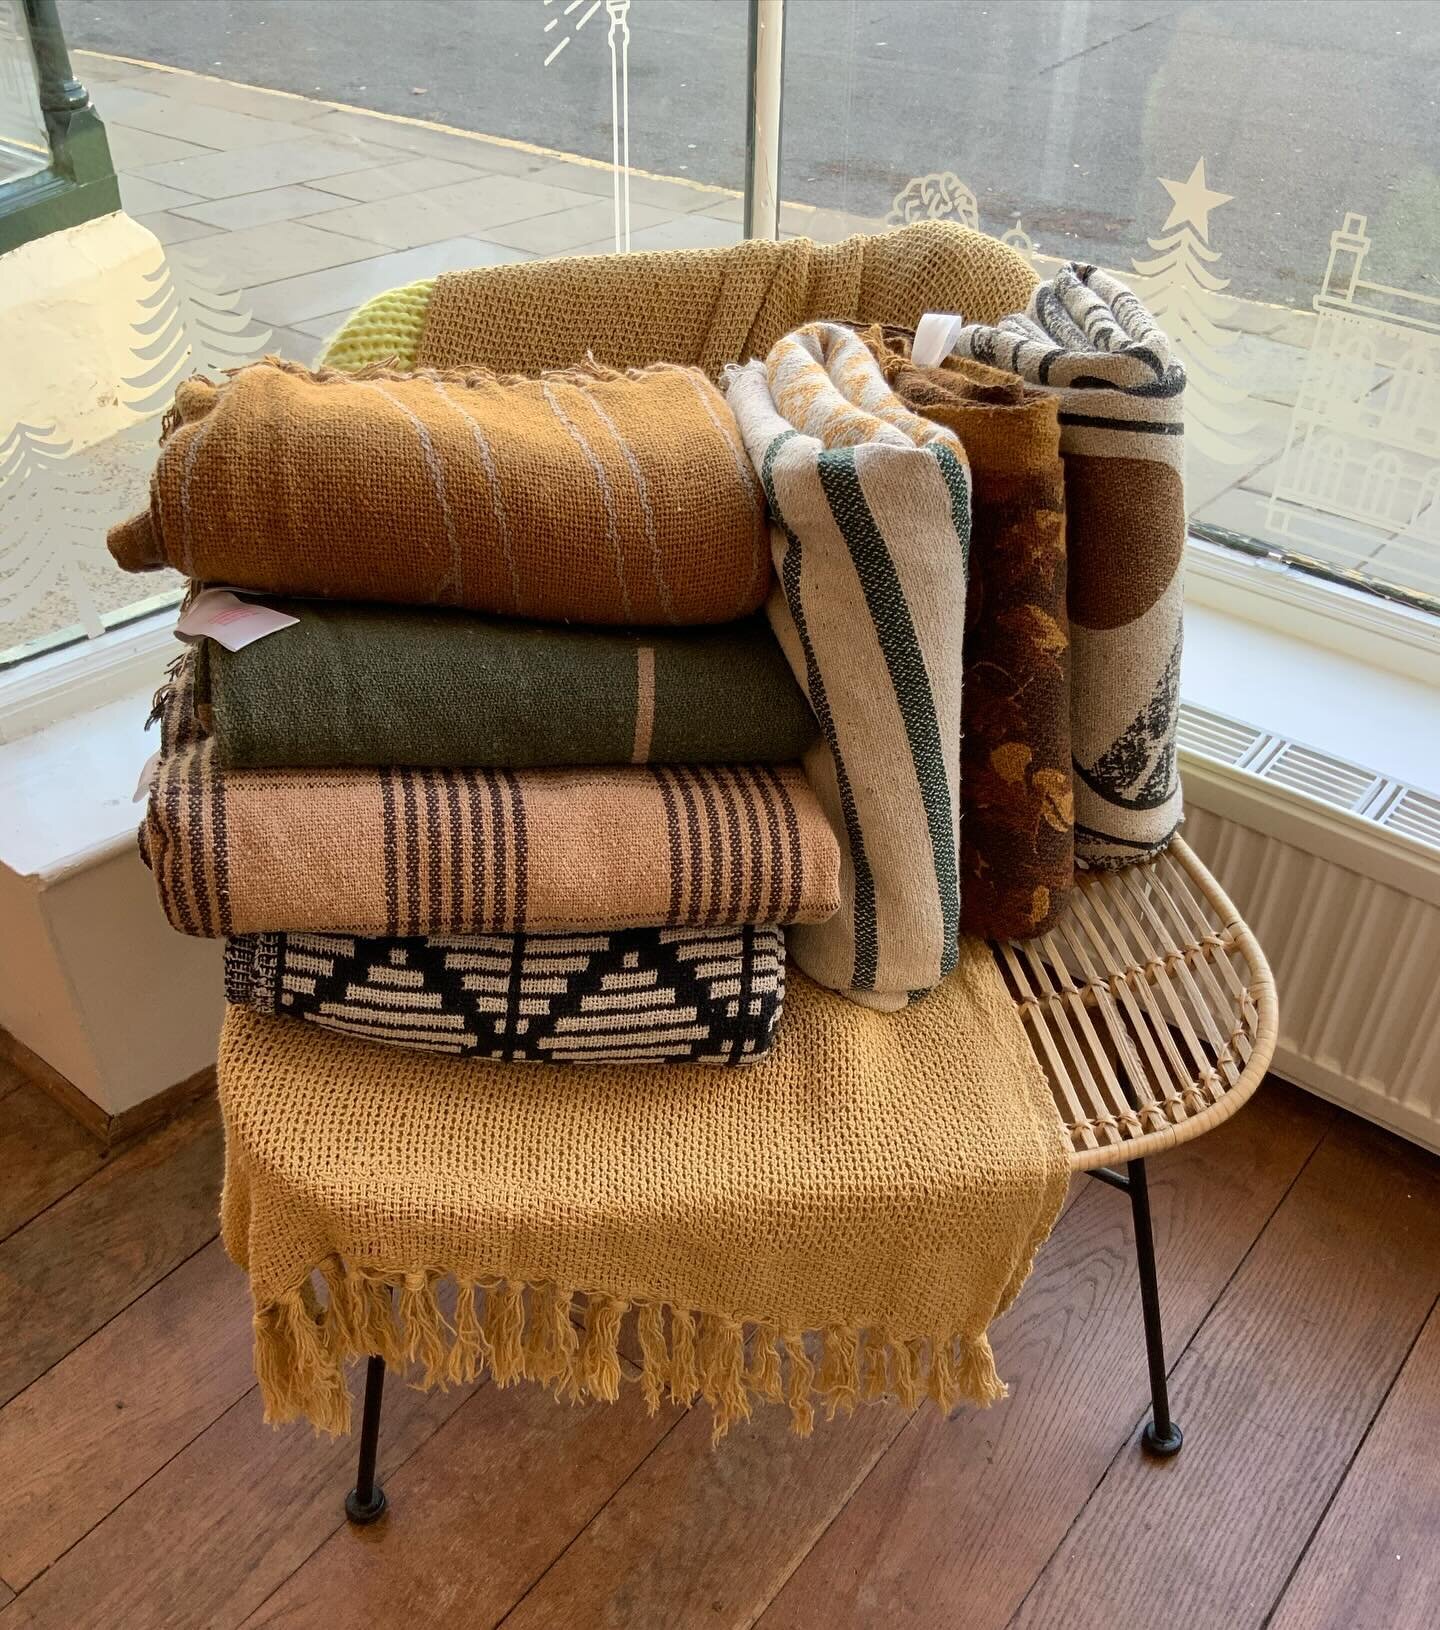 We have some of the nicest @bloomingville blankets in at the moment. They&rsquo;re such a great price at &pound;20 too. The monochrome one at the bottom is next on my list ☑️ #cosy #cosyhome #cosyseason #springiscoming